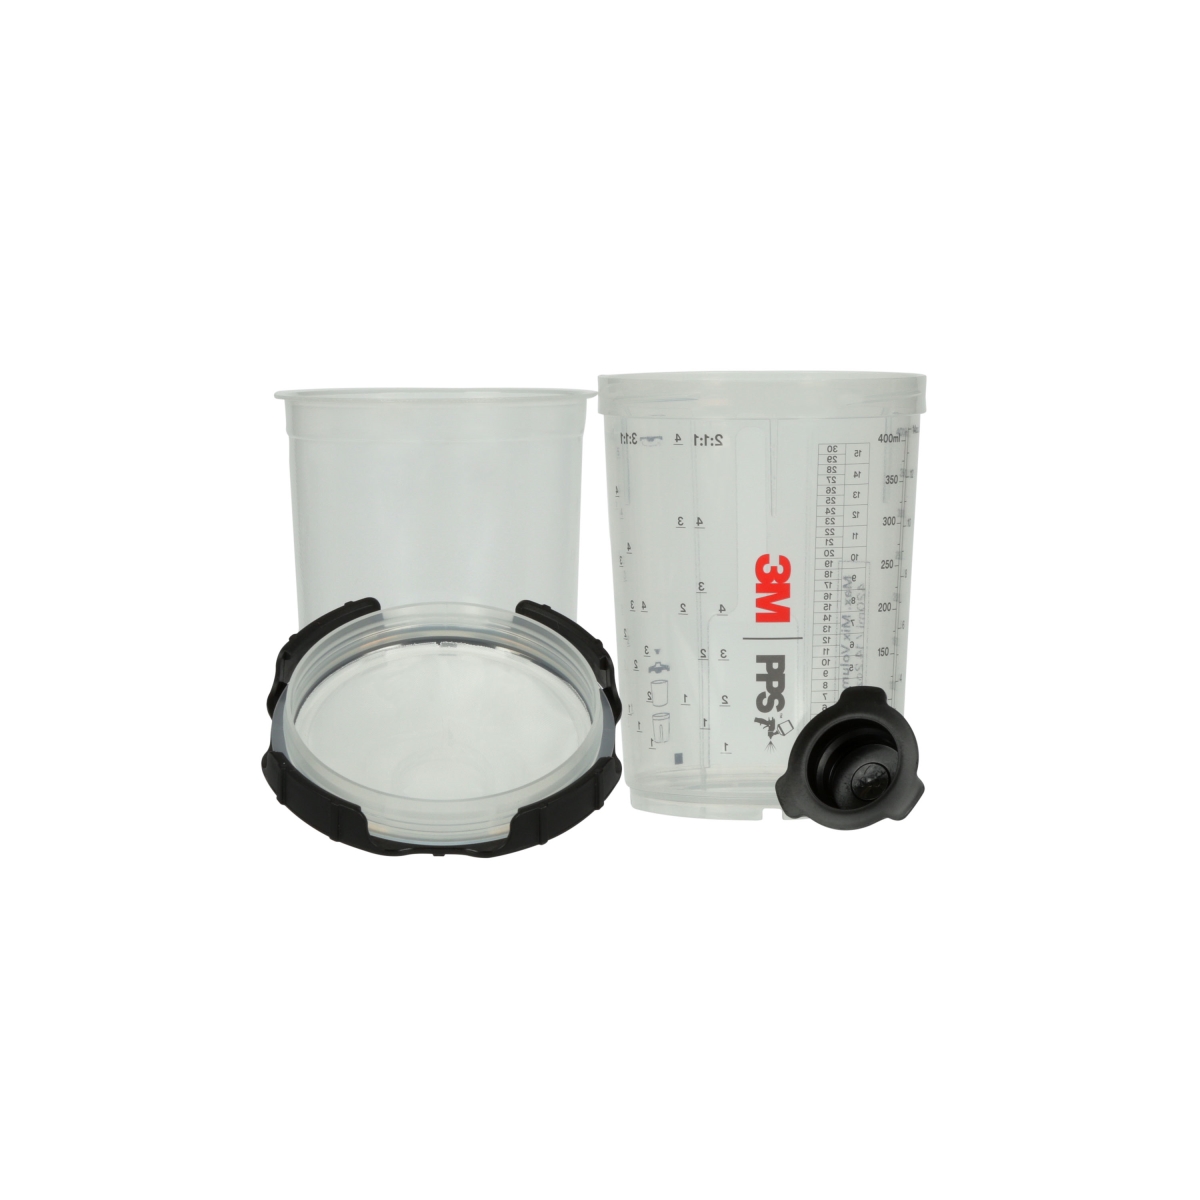 3M 2PS-26112 13.5 oz PPS Series 2.0 Spray Cup System Kit with 200U Micron Filter - Midi